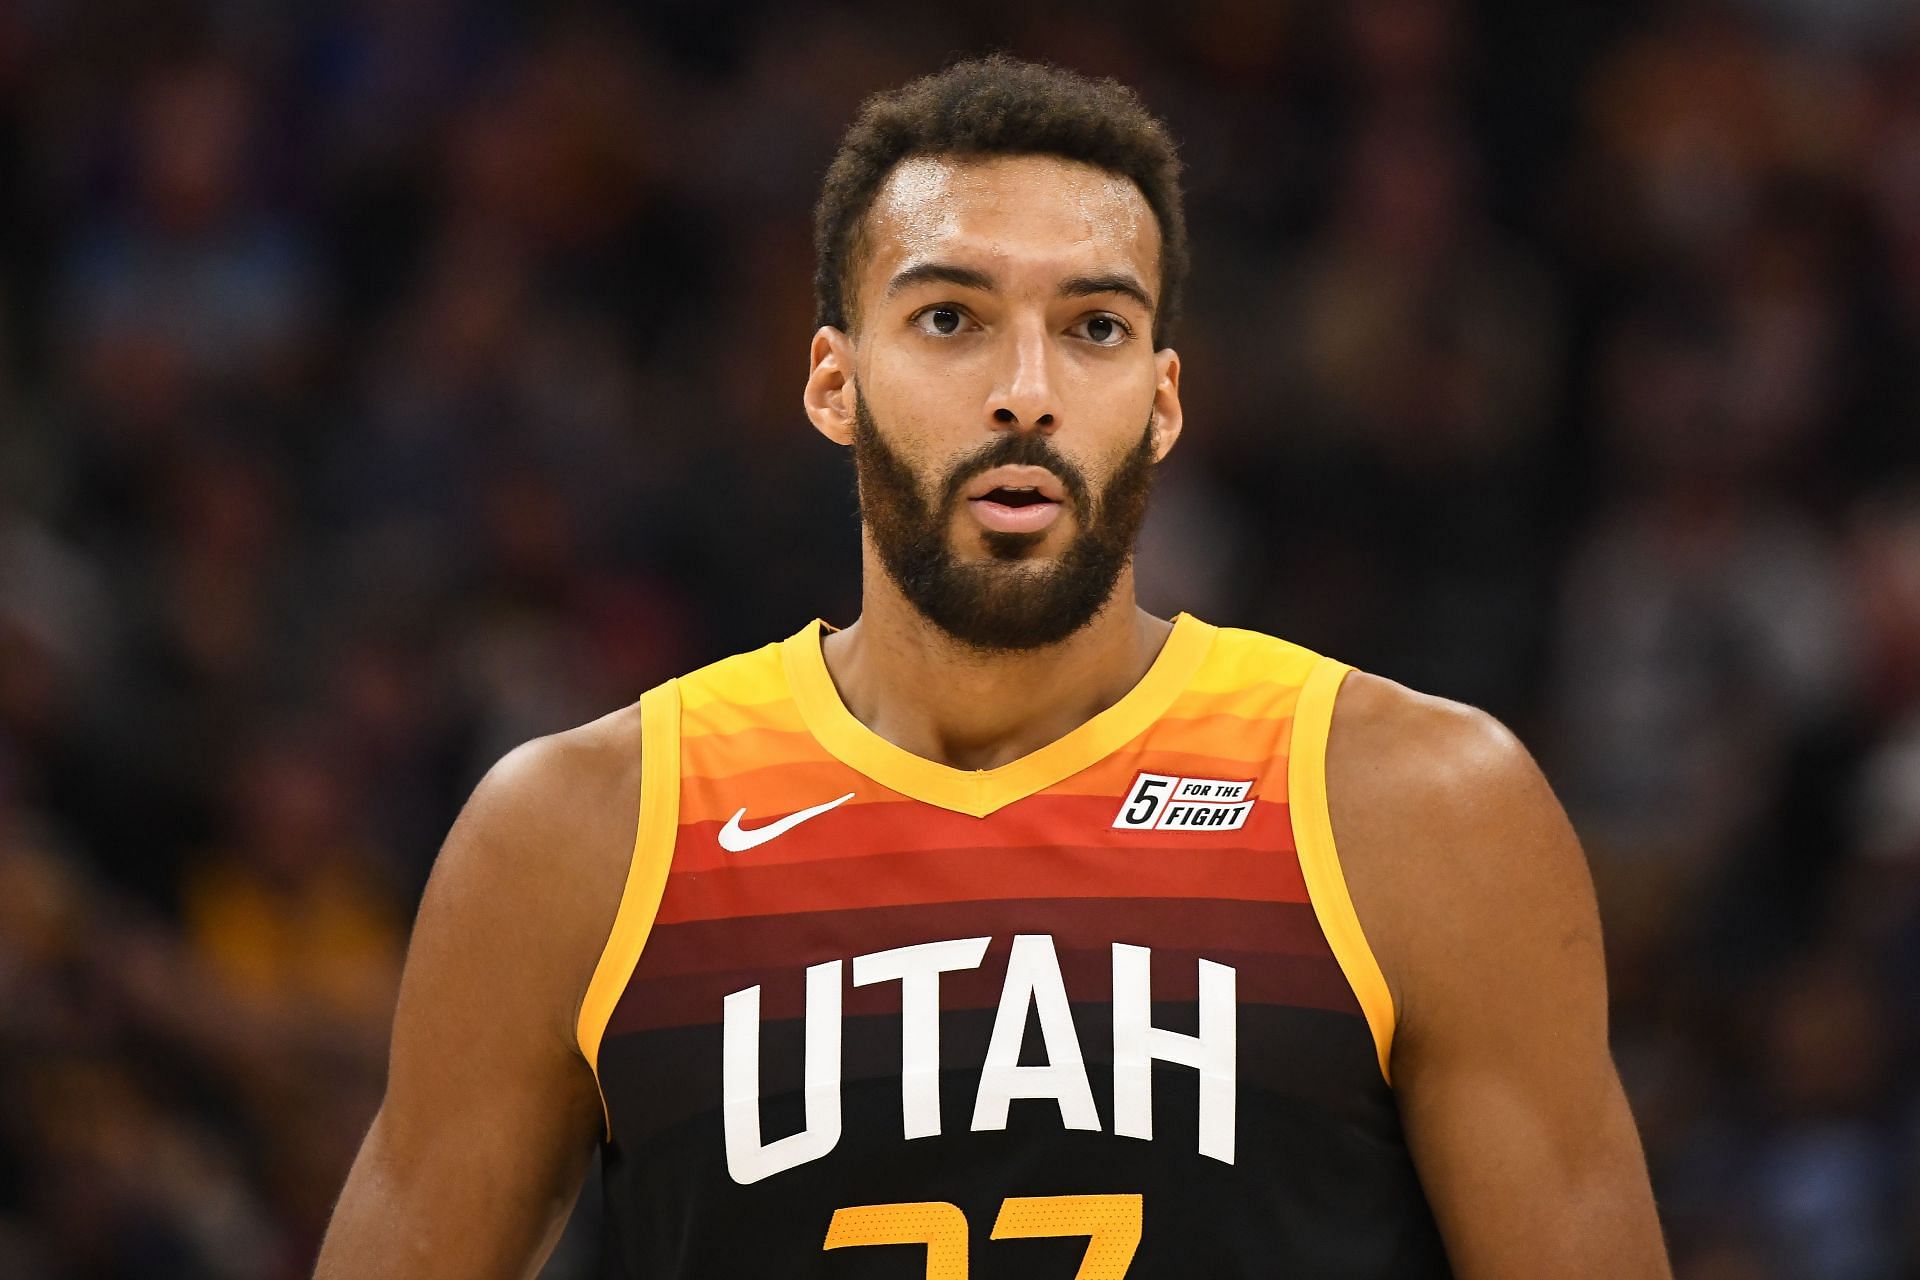 Utah Jazz big man Rudy Gobert continues to make noise as a potential Defensive Player of the year